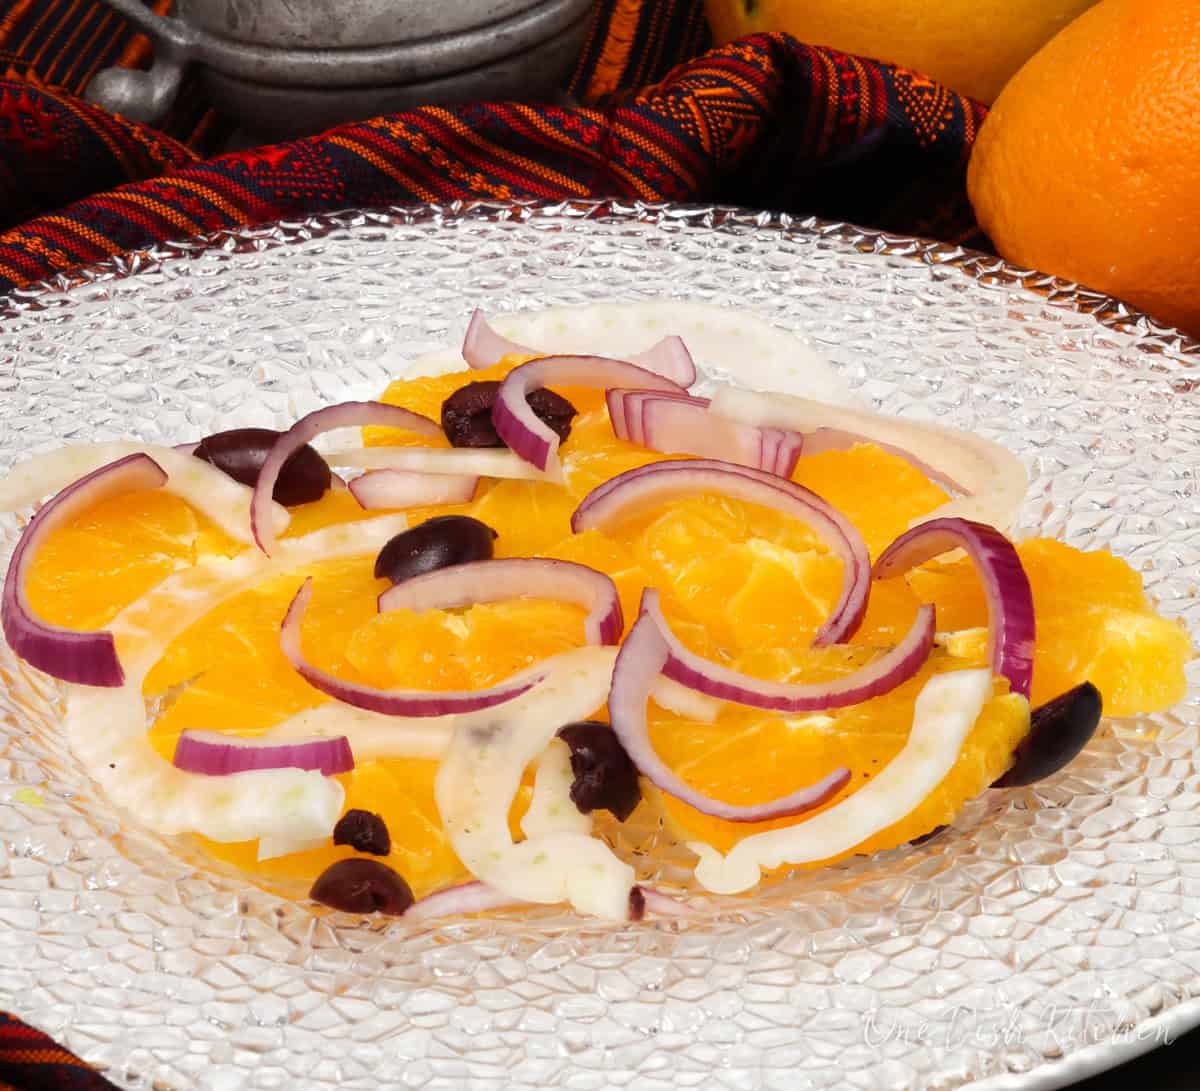 orange slices, red onions, fennel, and kalamata olives on a white plate.